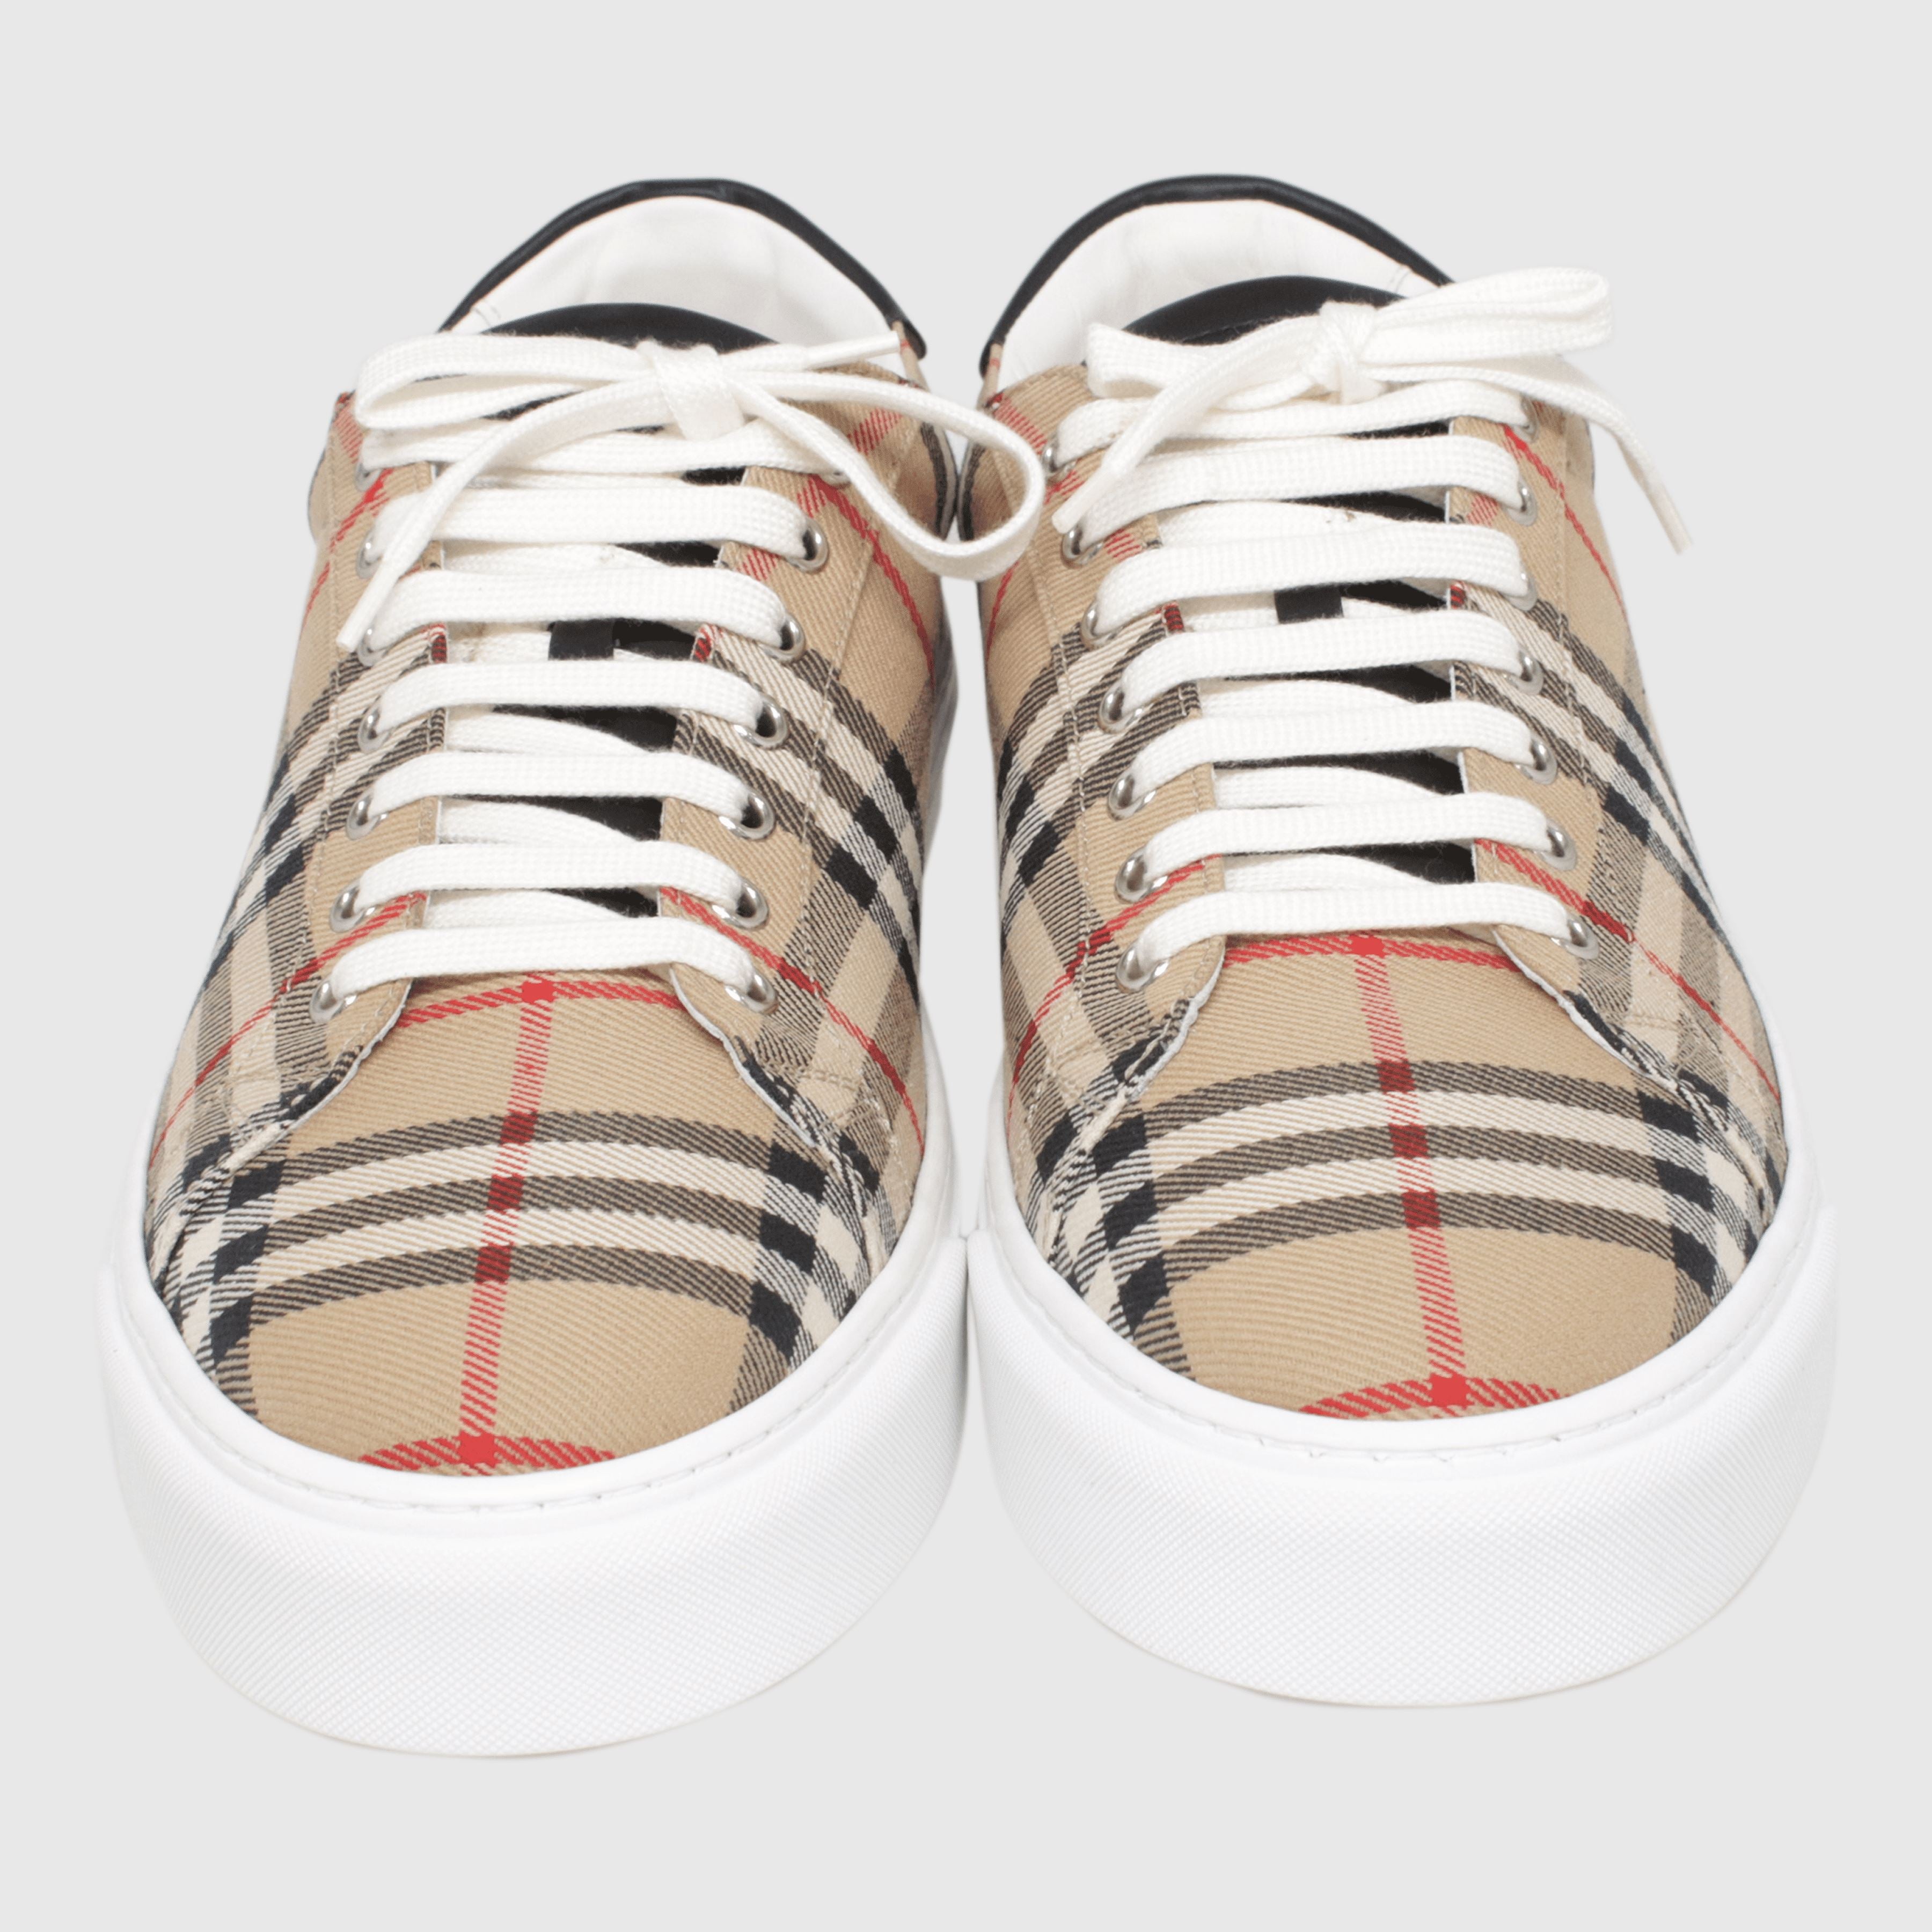 Checkered Lace Up Sneaker Shoes Burberry 